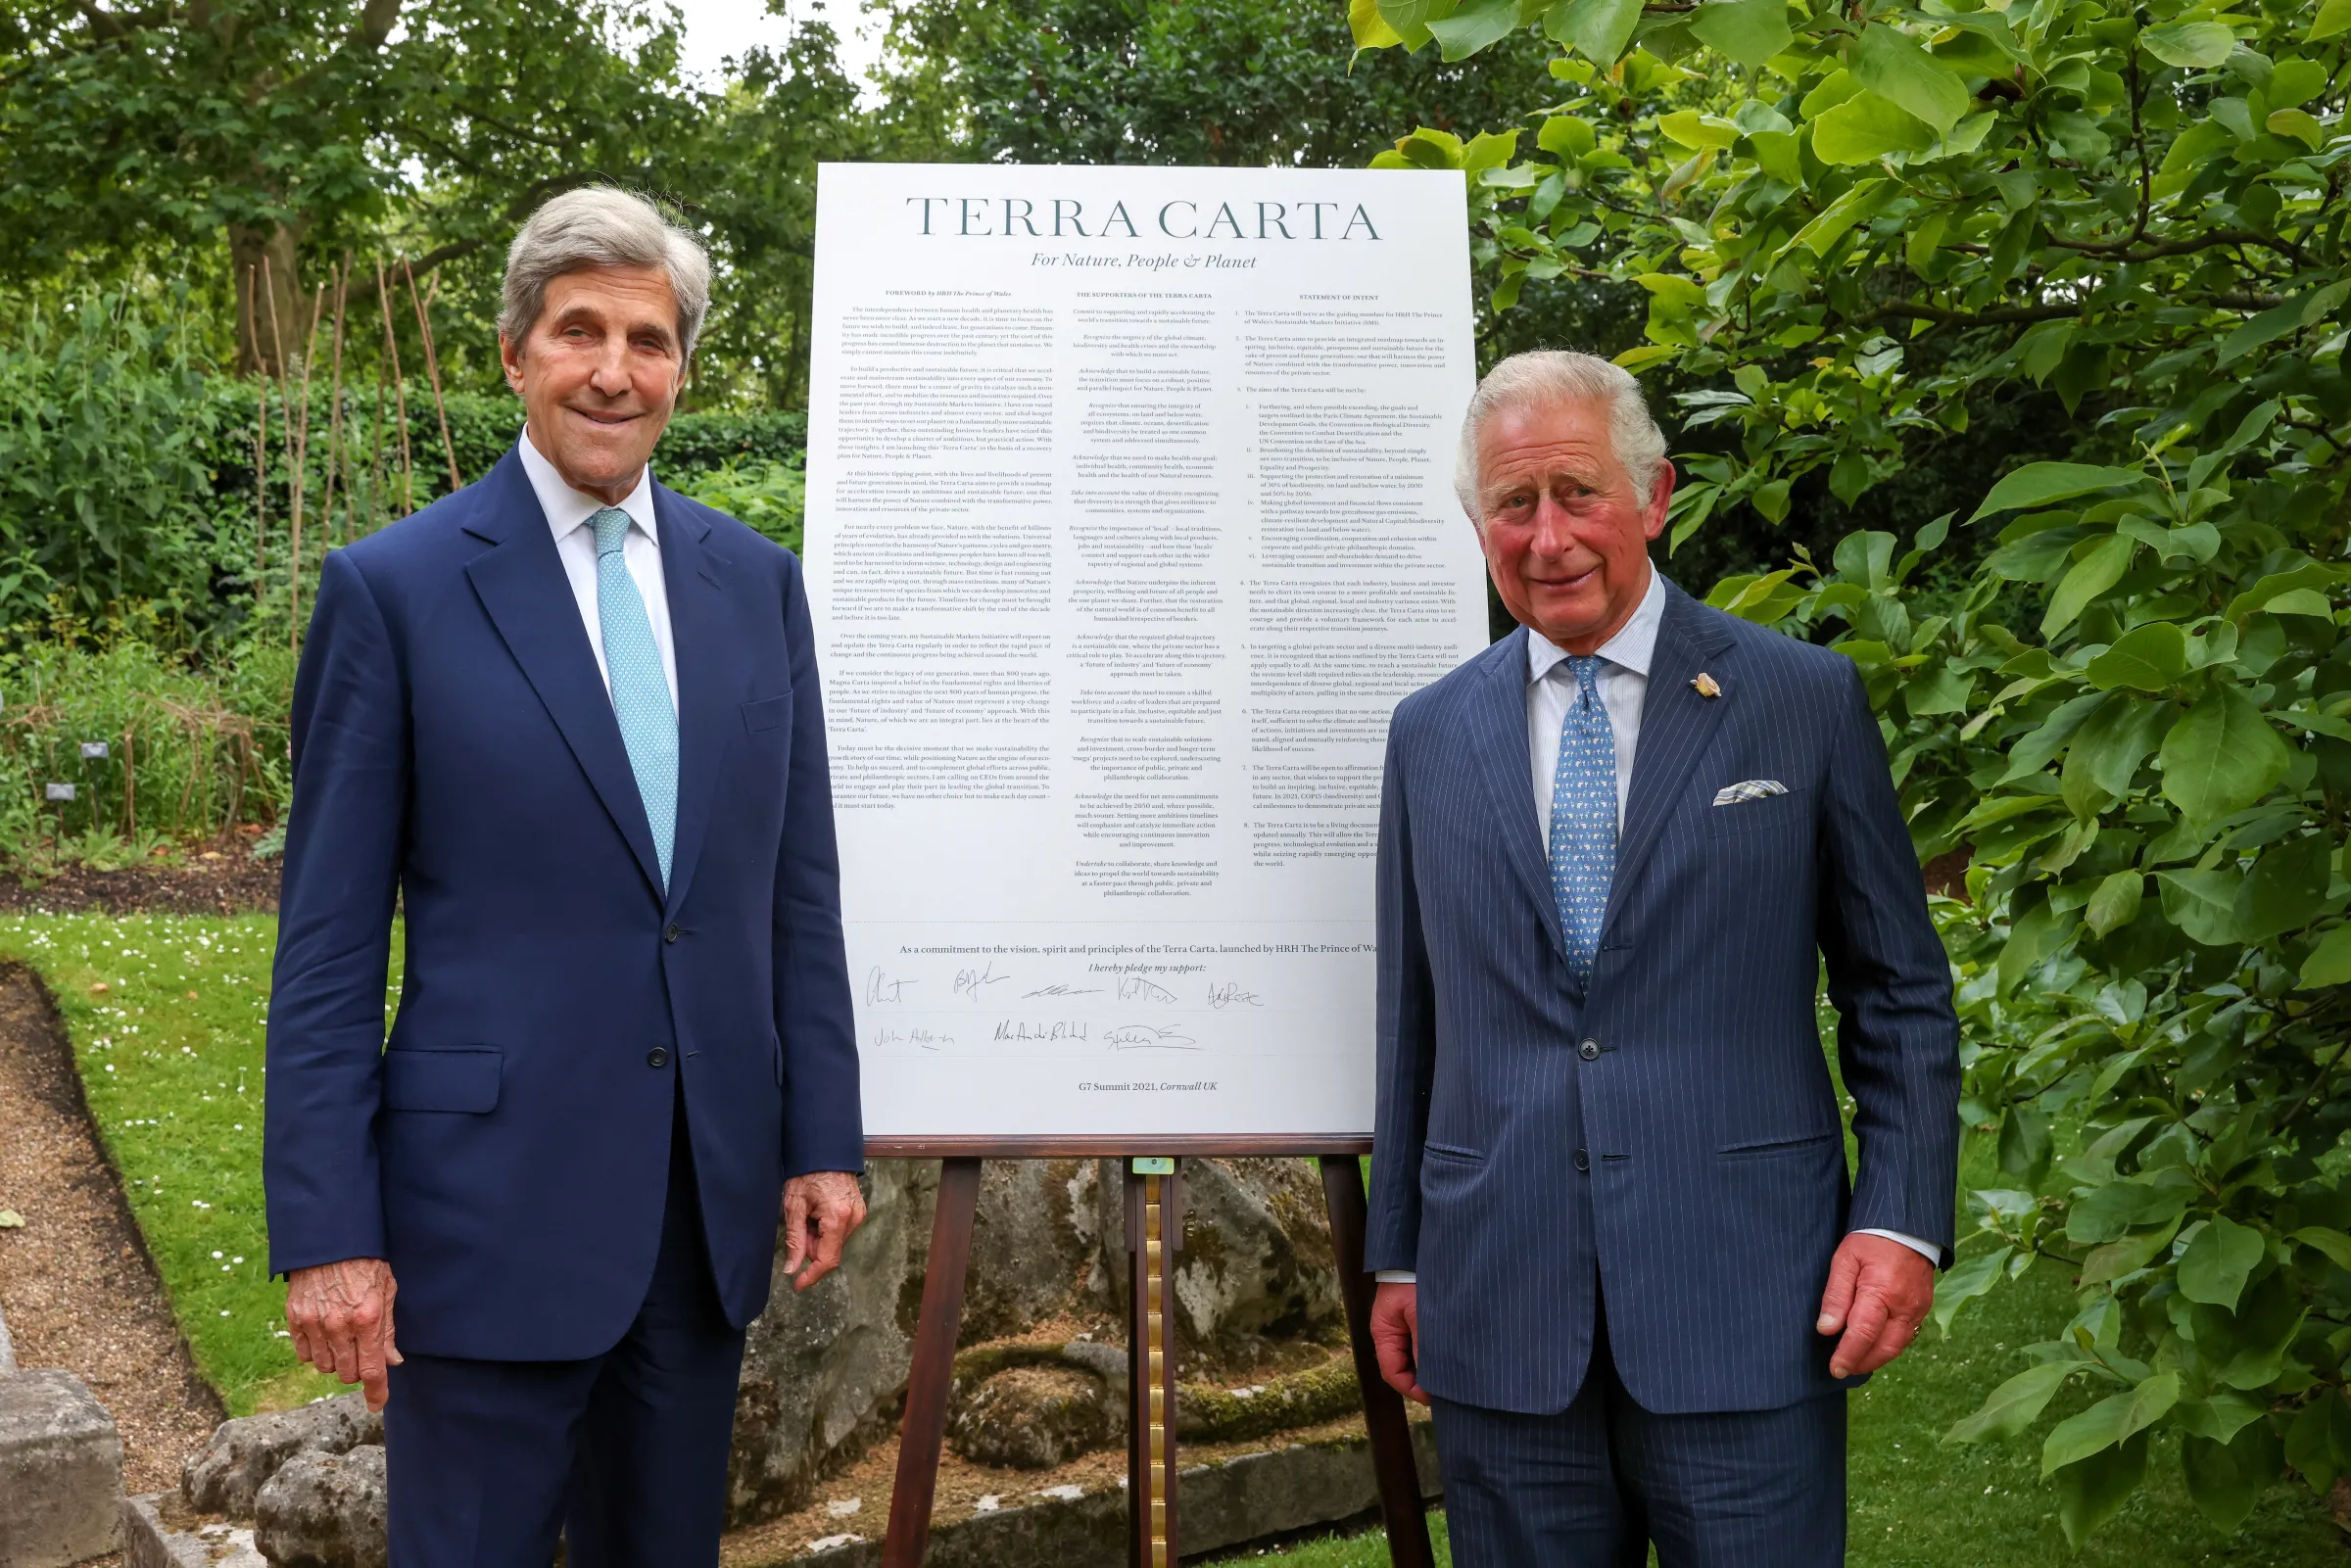 U.S. Special Presidential Envoy for Climate John Kerry poses in front of the Terra Carta with Britain's Prince Charles, who announced the Terra Carta Transition Coalitions at St James Palace, in London, Britain June 10, 2021. Chris Jackson/Pool via REUTERS